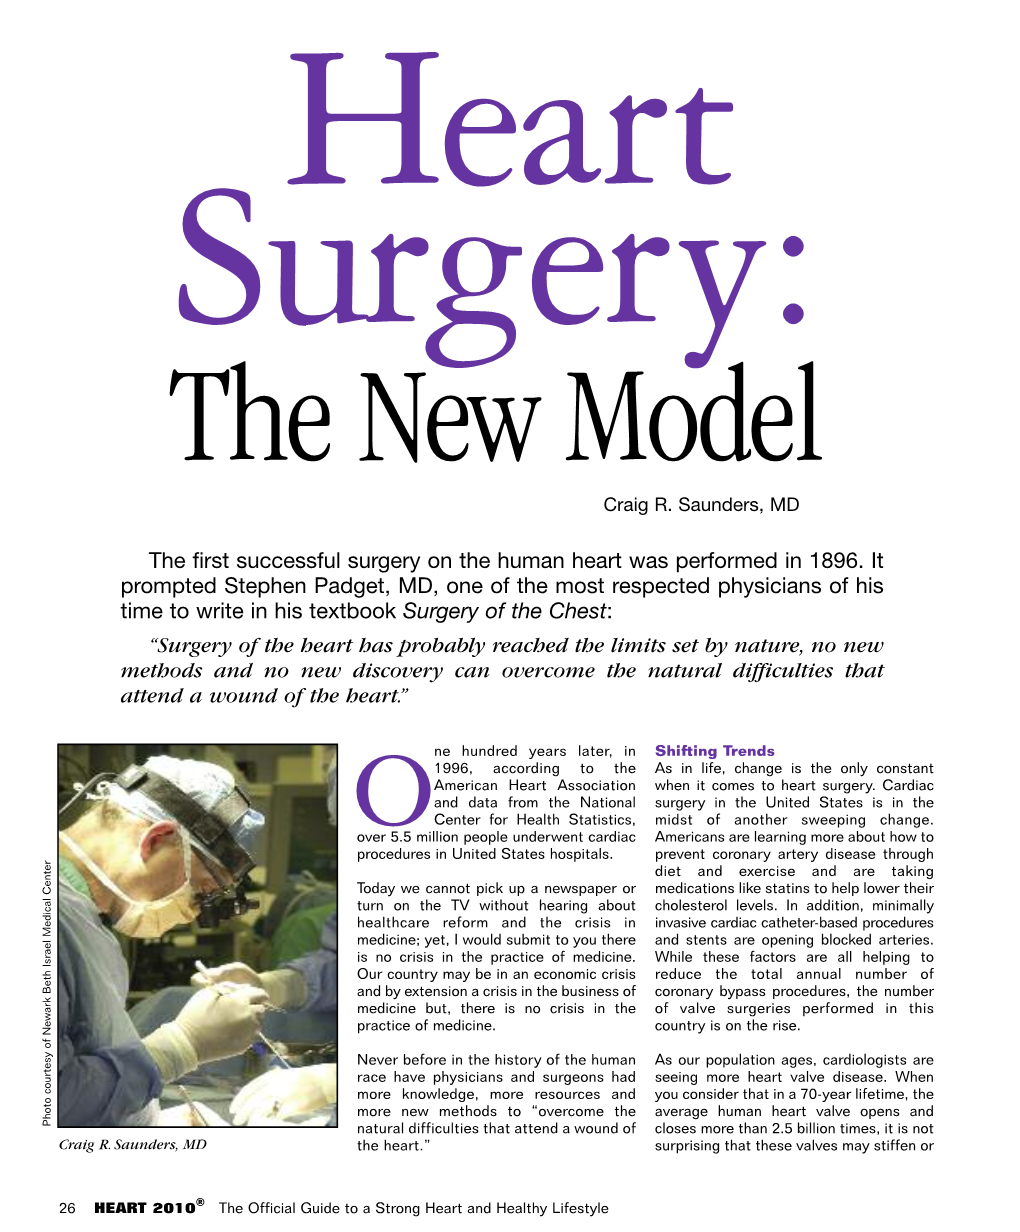 Heart Surgery: the New Model